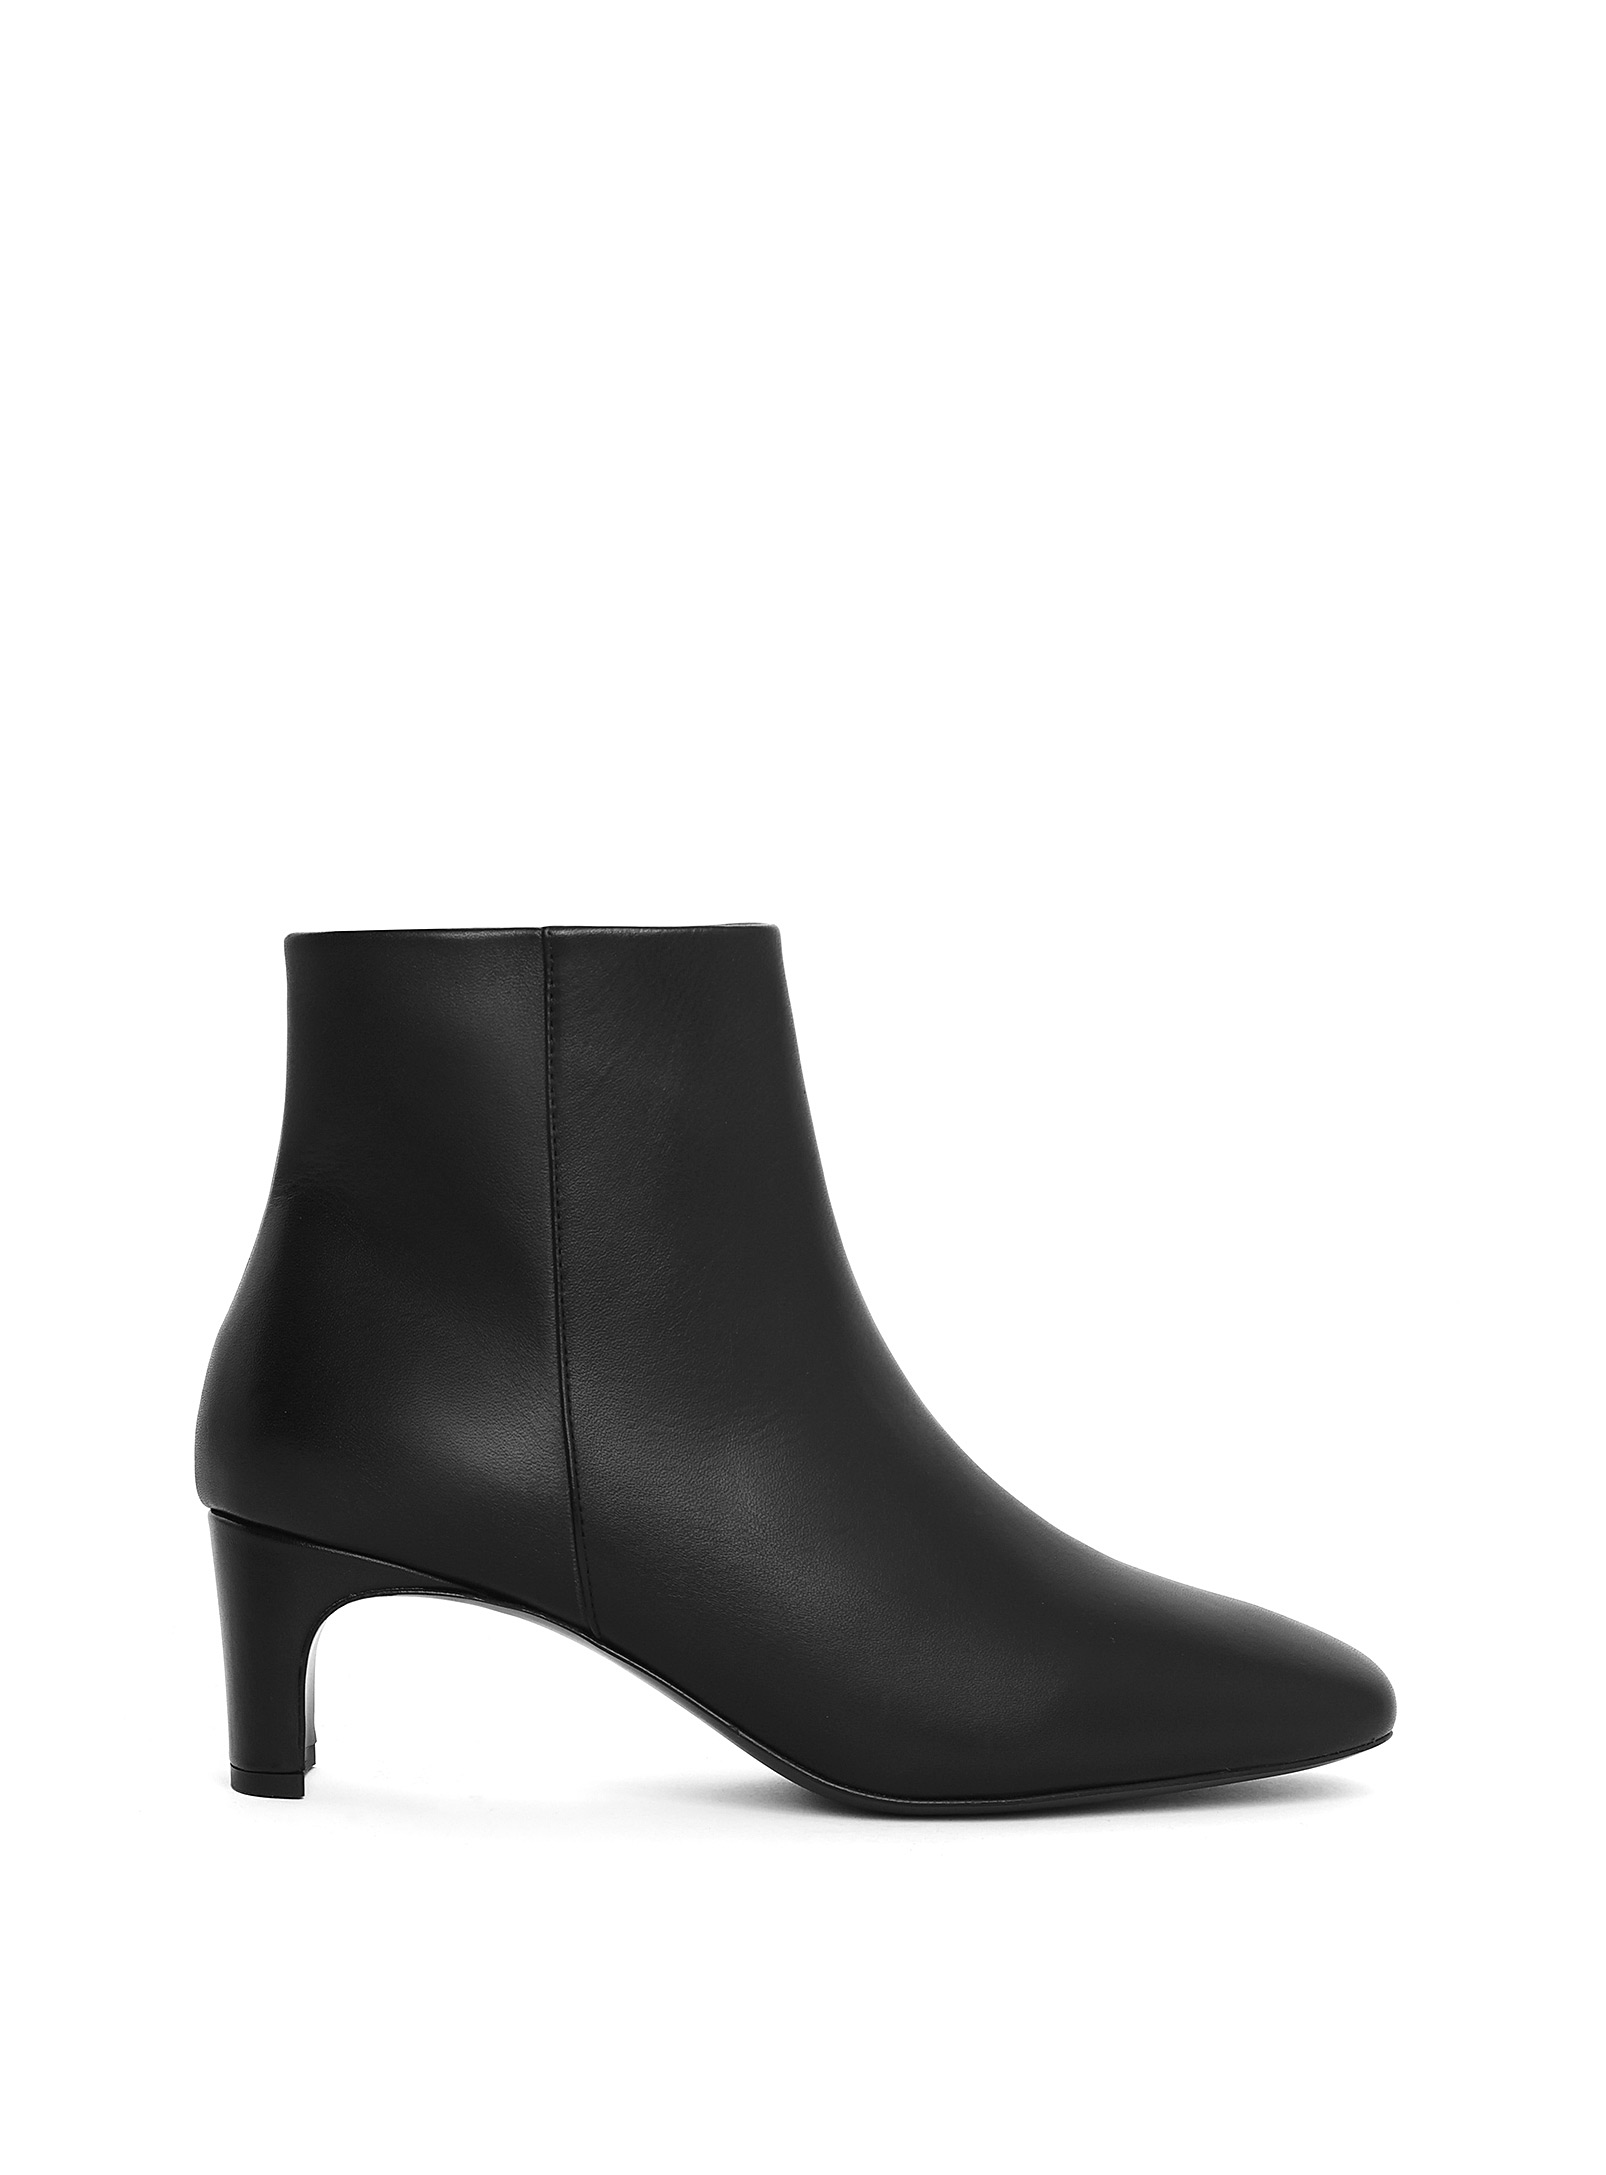 Maguire - Women's Salema leather ankle boots Women